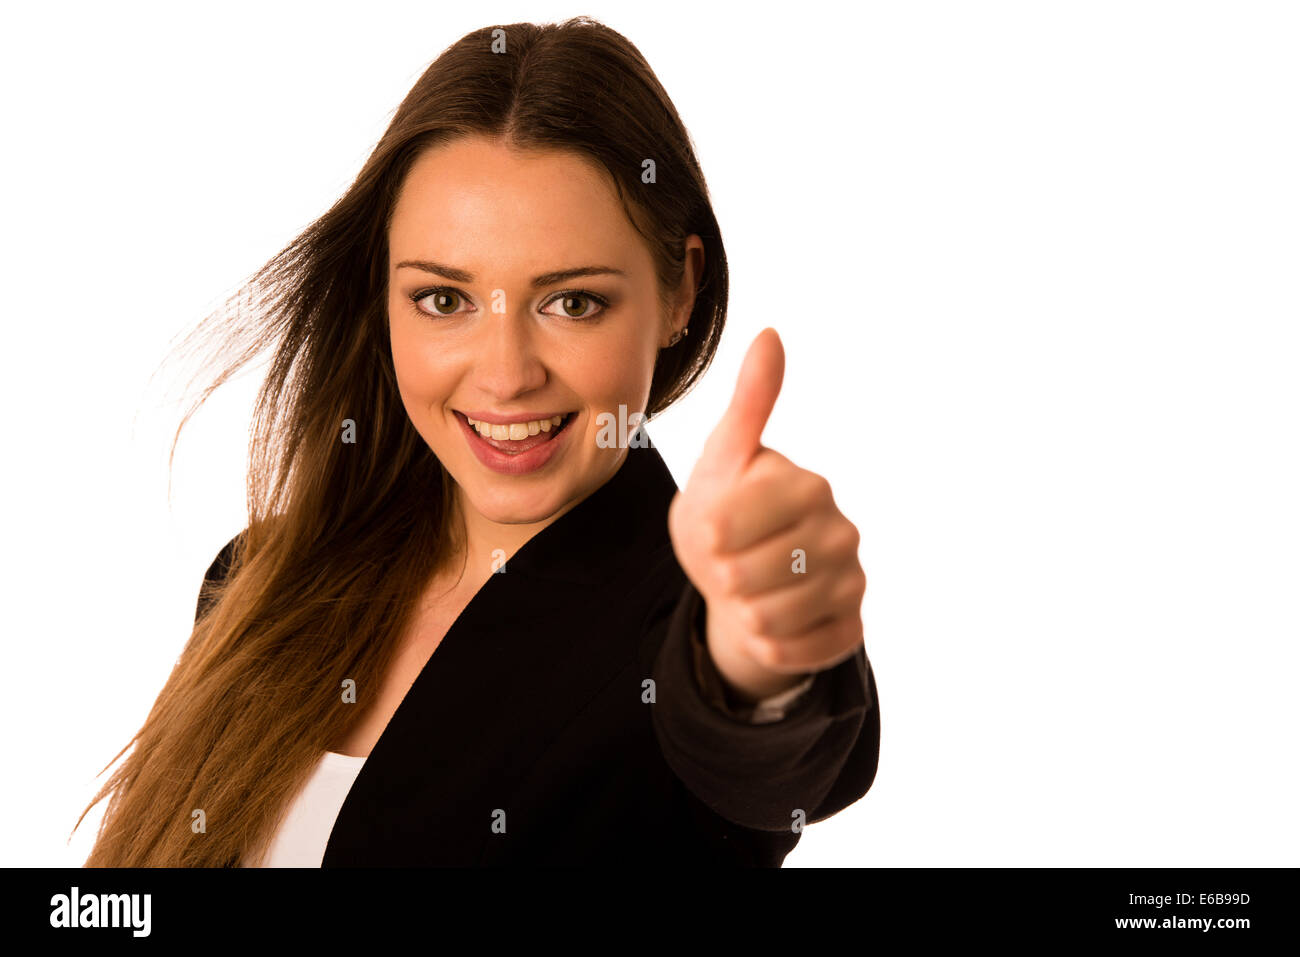 Preety asian caucasian business woman gesturing success showing thumb up isolated over white Stock Photo